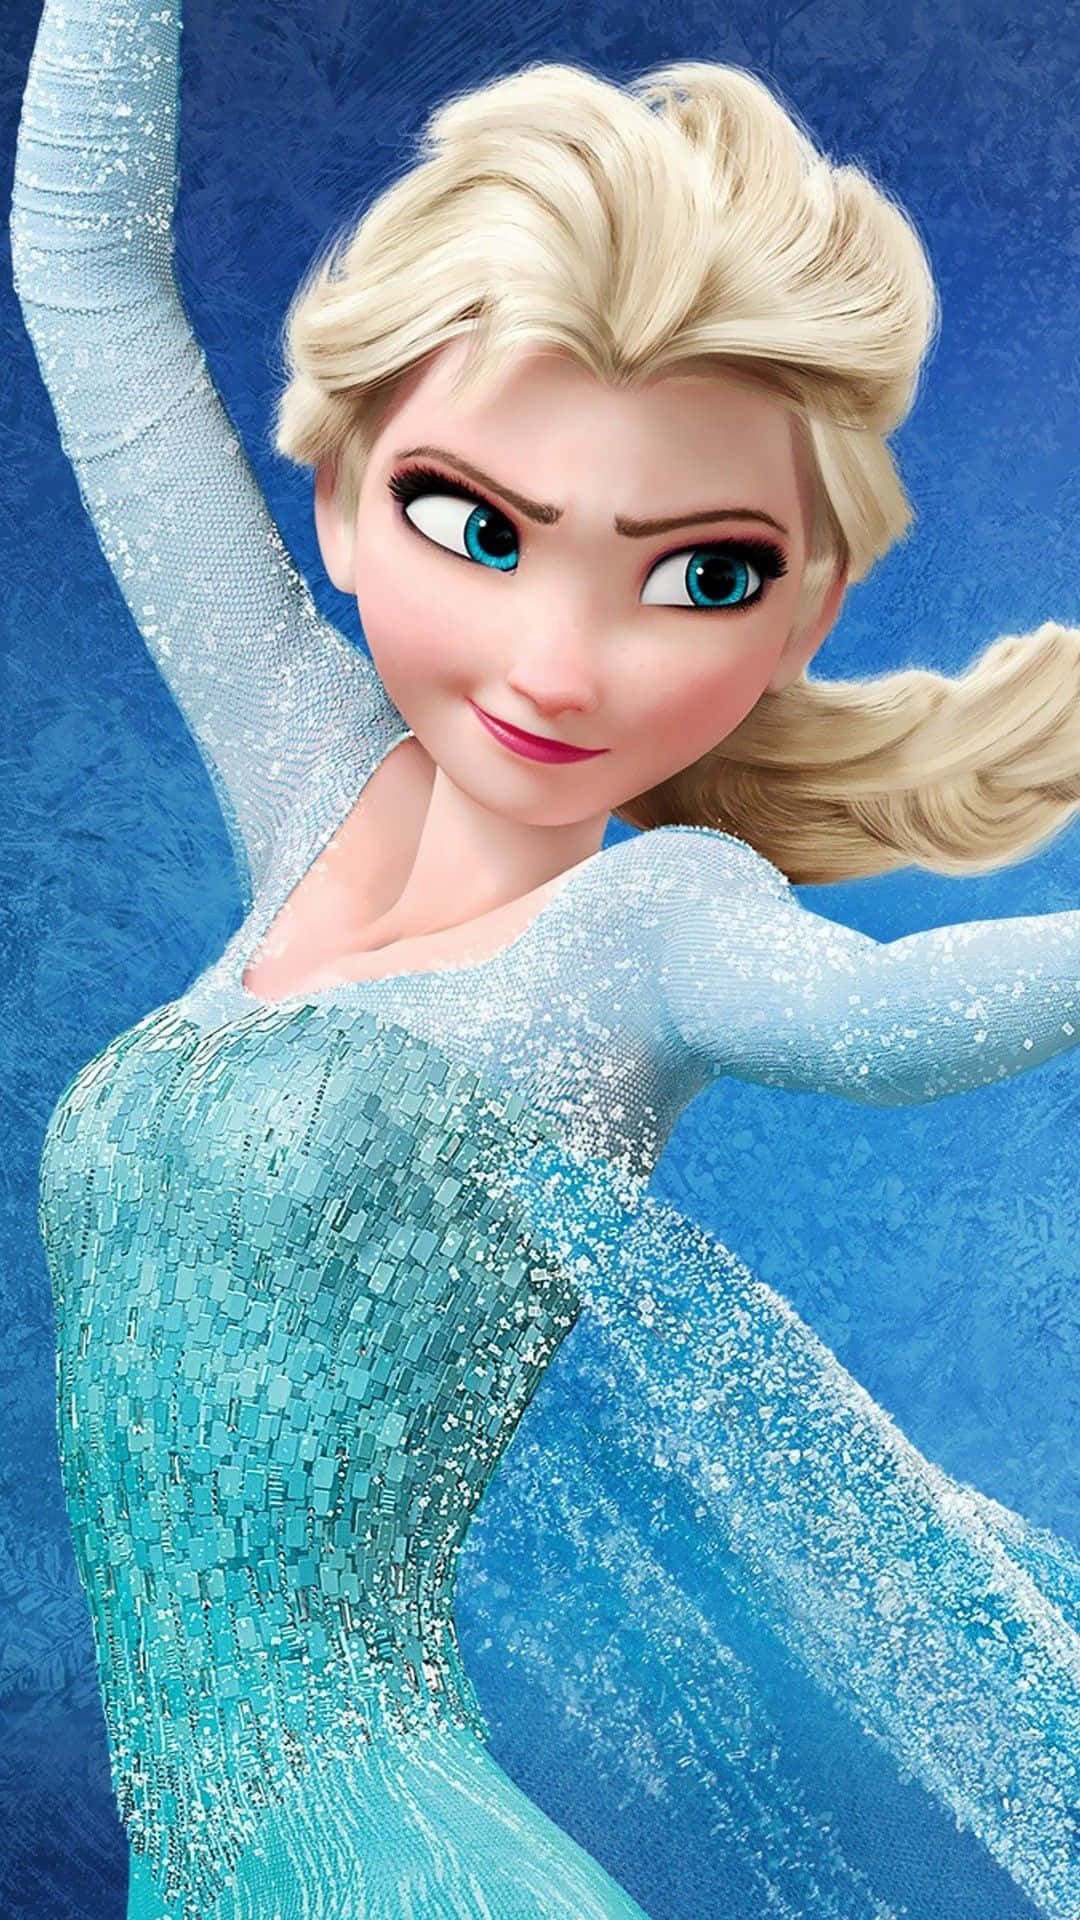 Captivating Elsa From Disney's Frozen Against A Wintry Background